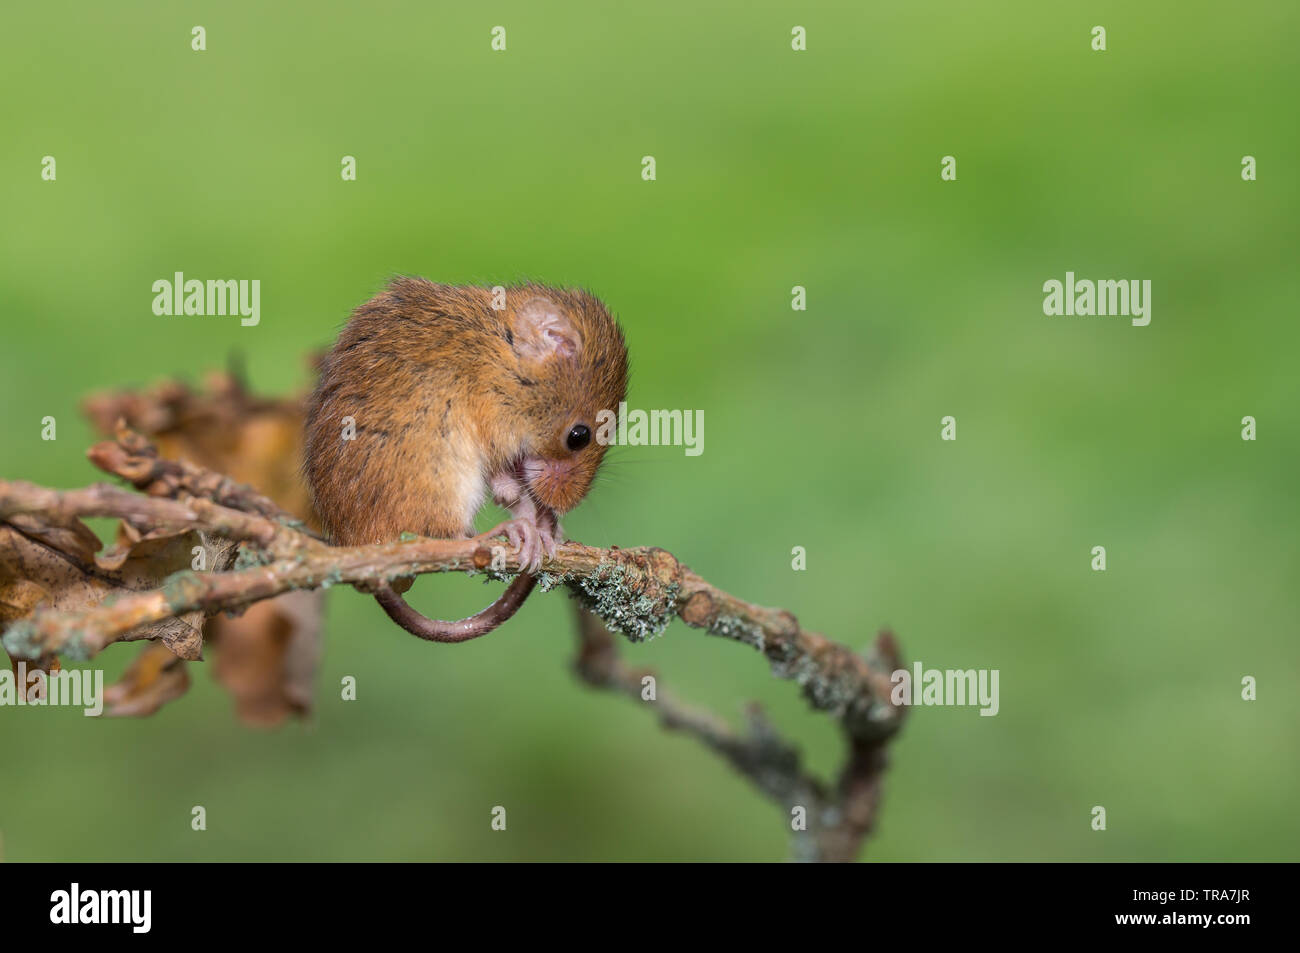 The harvest mouse is a small rodent native to Europe and Asia. It is typically found in fields of cereal crops Stock Photo